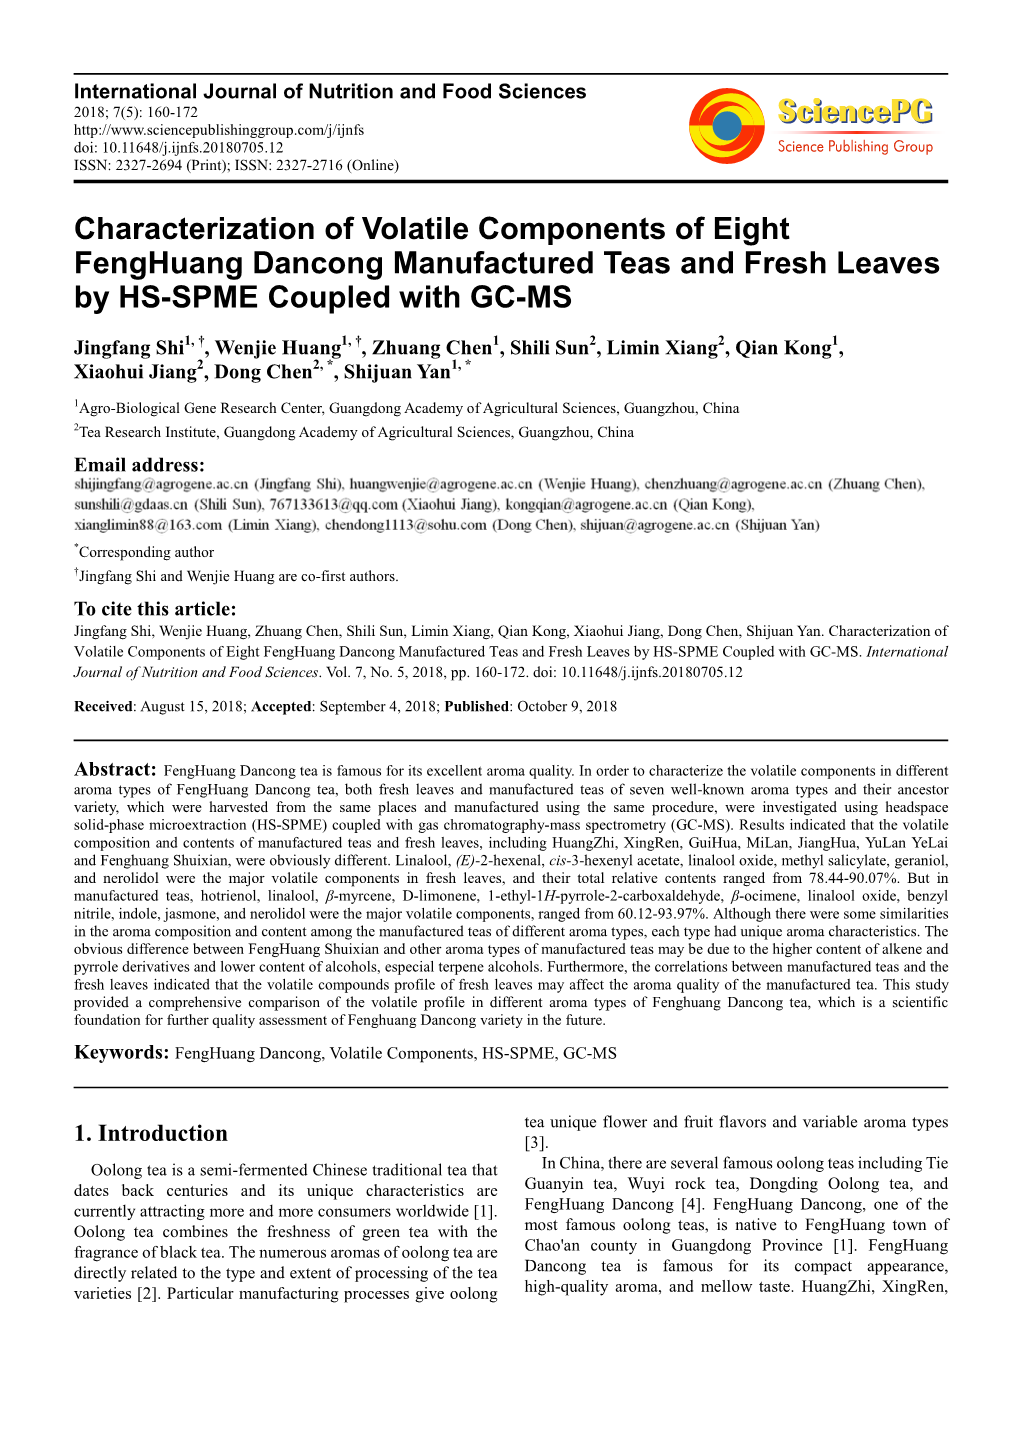 Characterization of Volatile Components of Eight Fenghuang Dancong Manufactured Teas and Fresh Leaves by HS-SPME Coupled with GC-MS